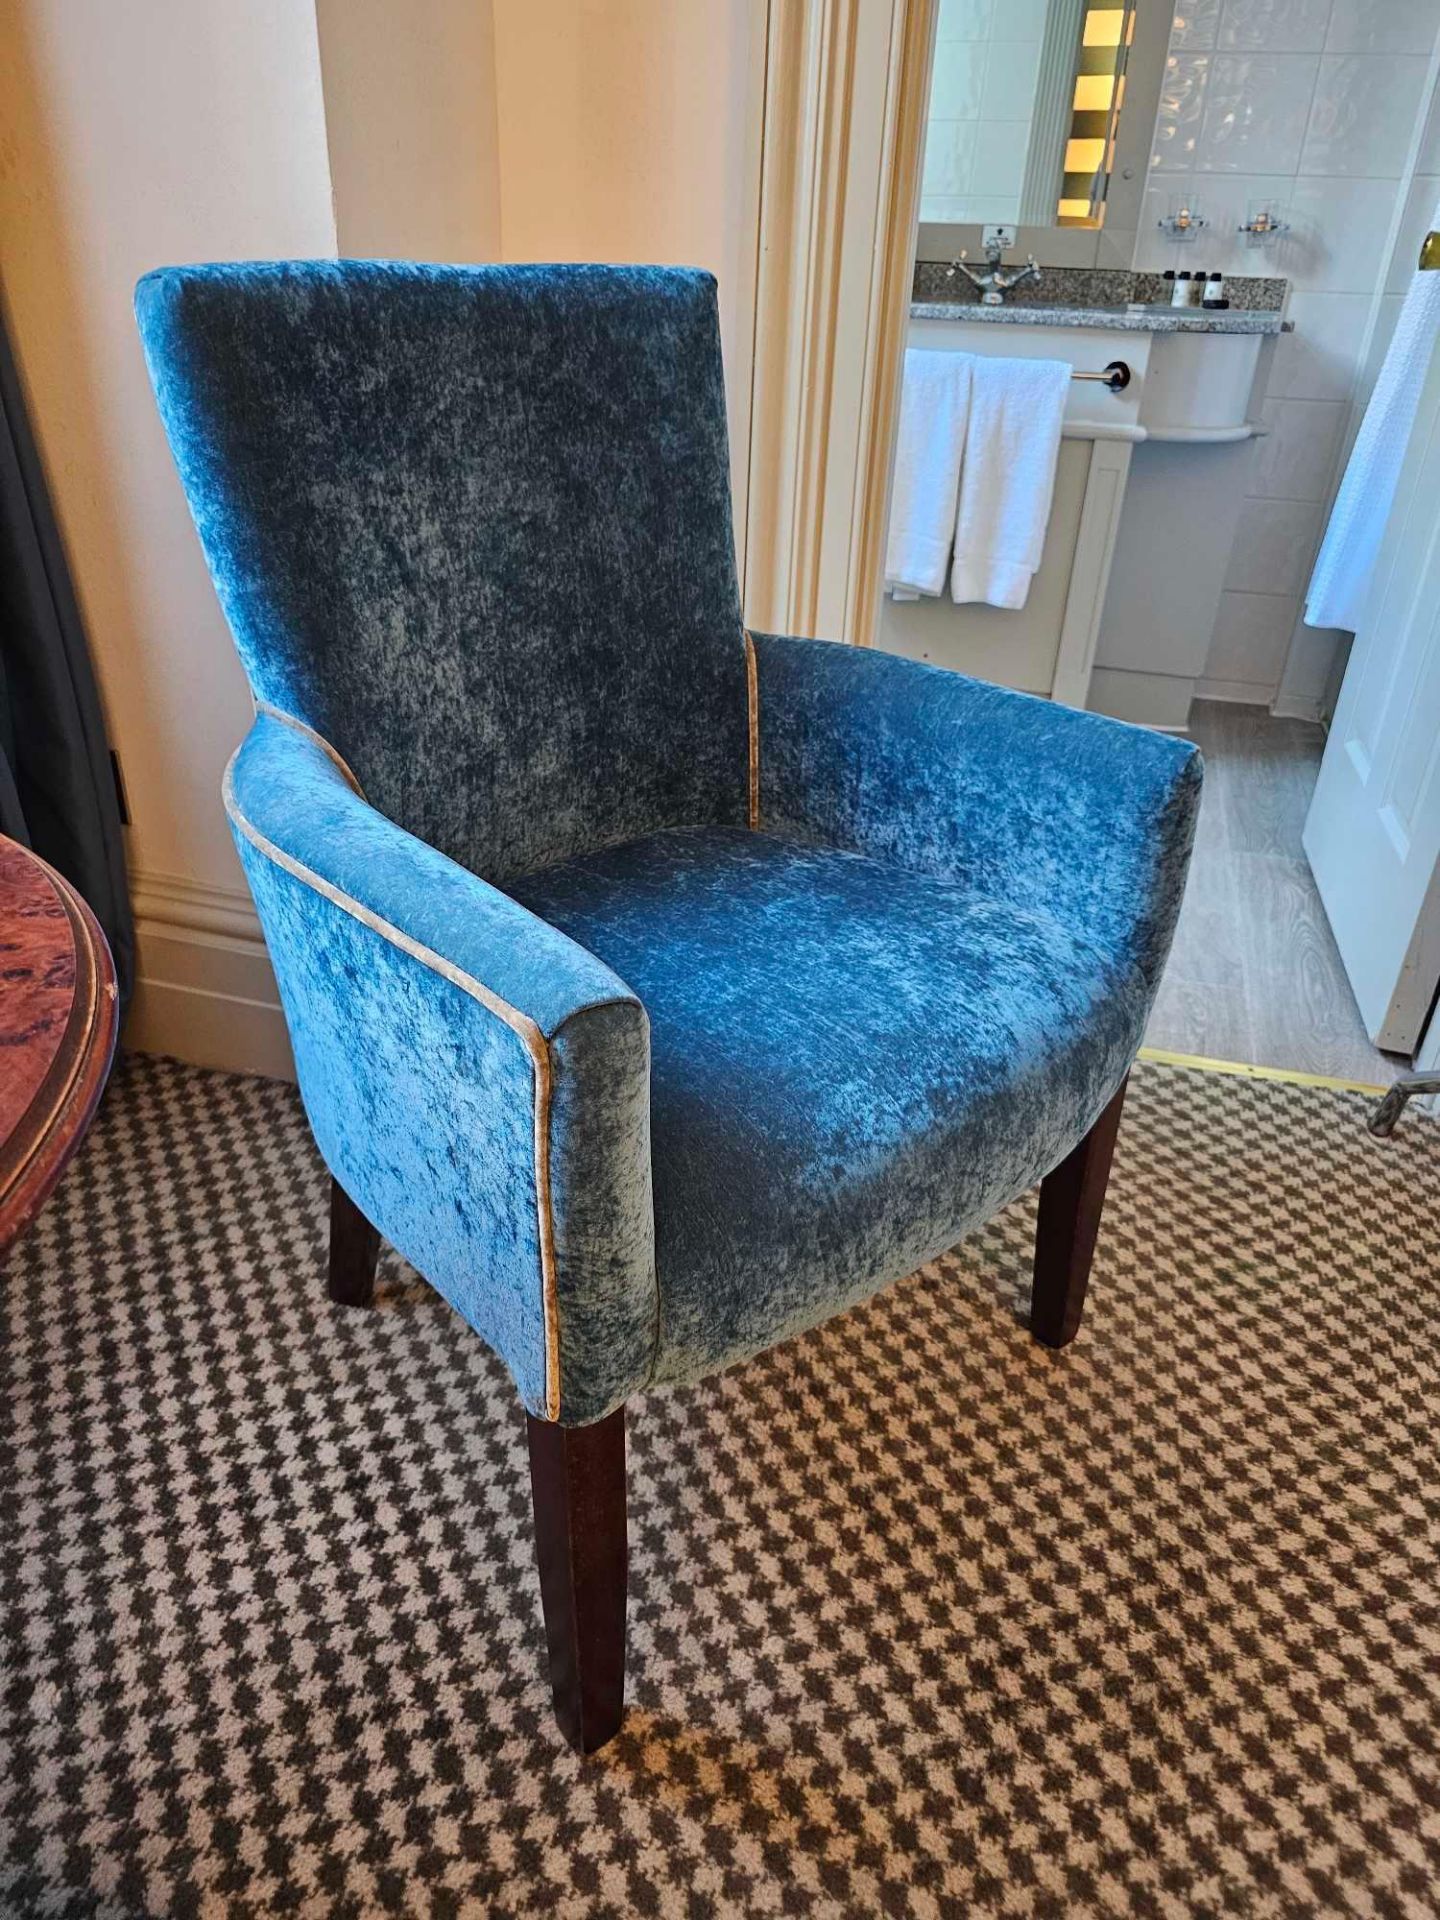 Armchair The Beautiful Teal Velvet Upholstery Is Exceptionally Soft And Luxurious, Providing A - Image 2 of 3